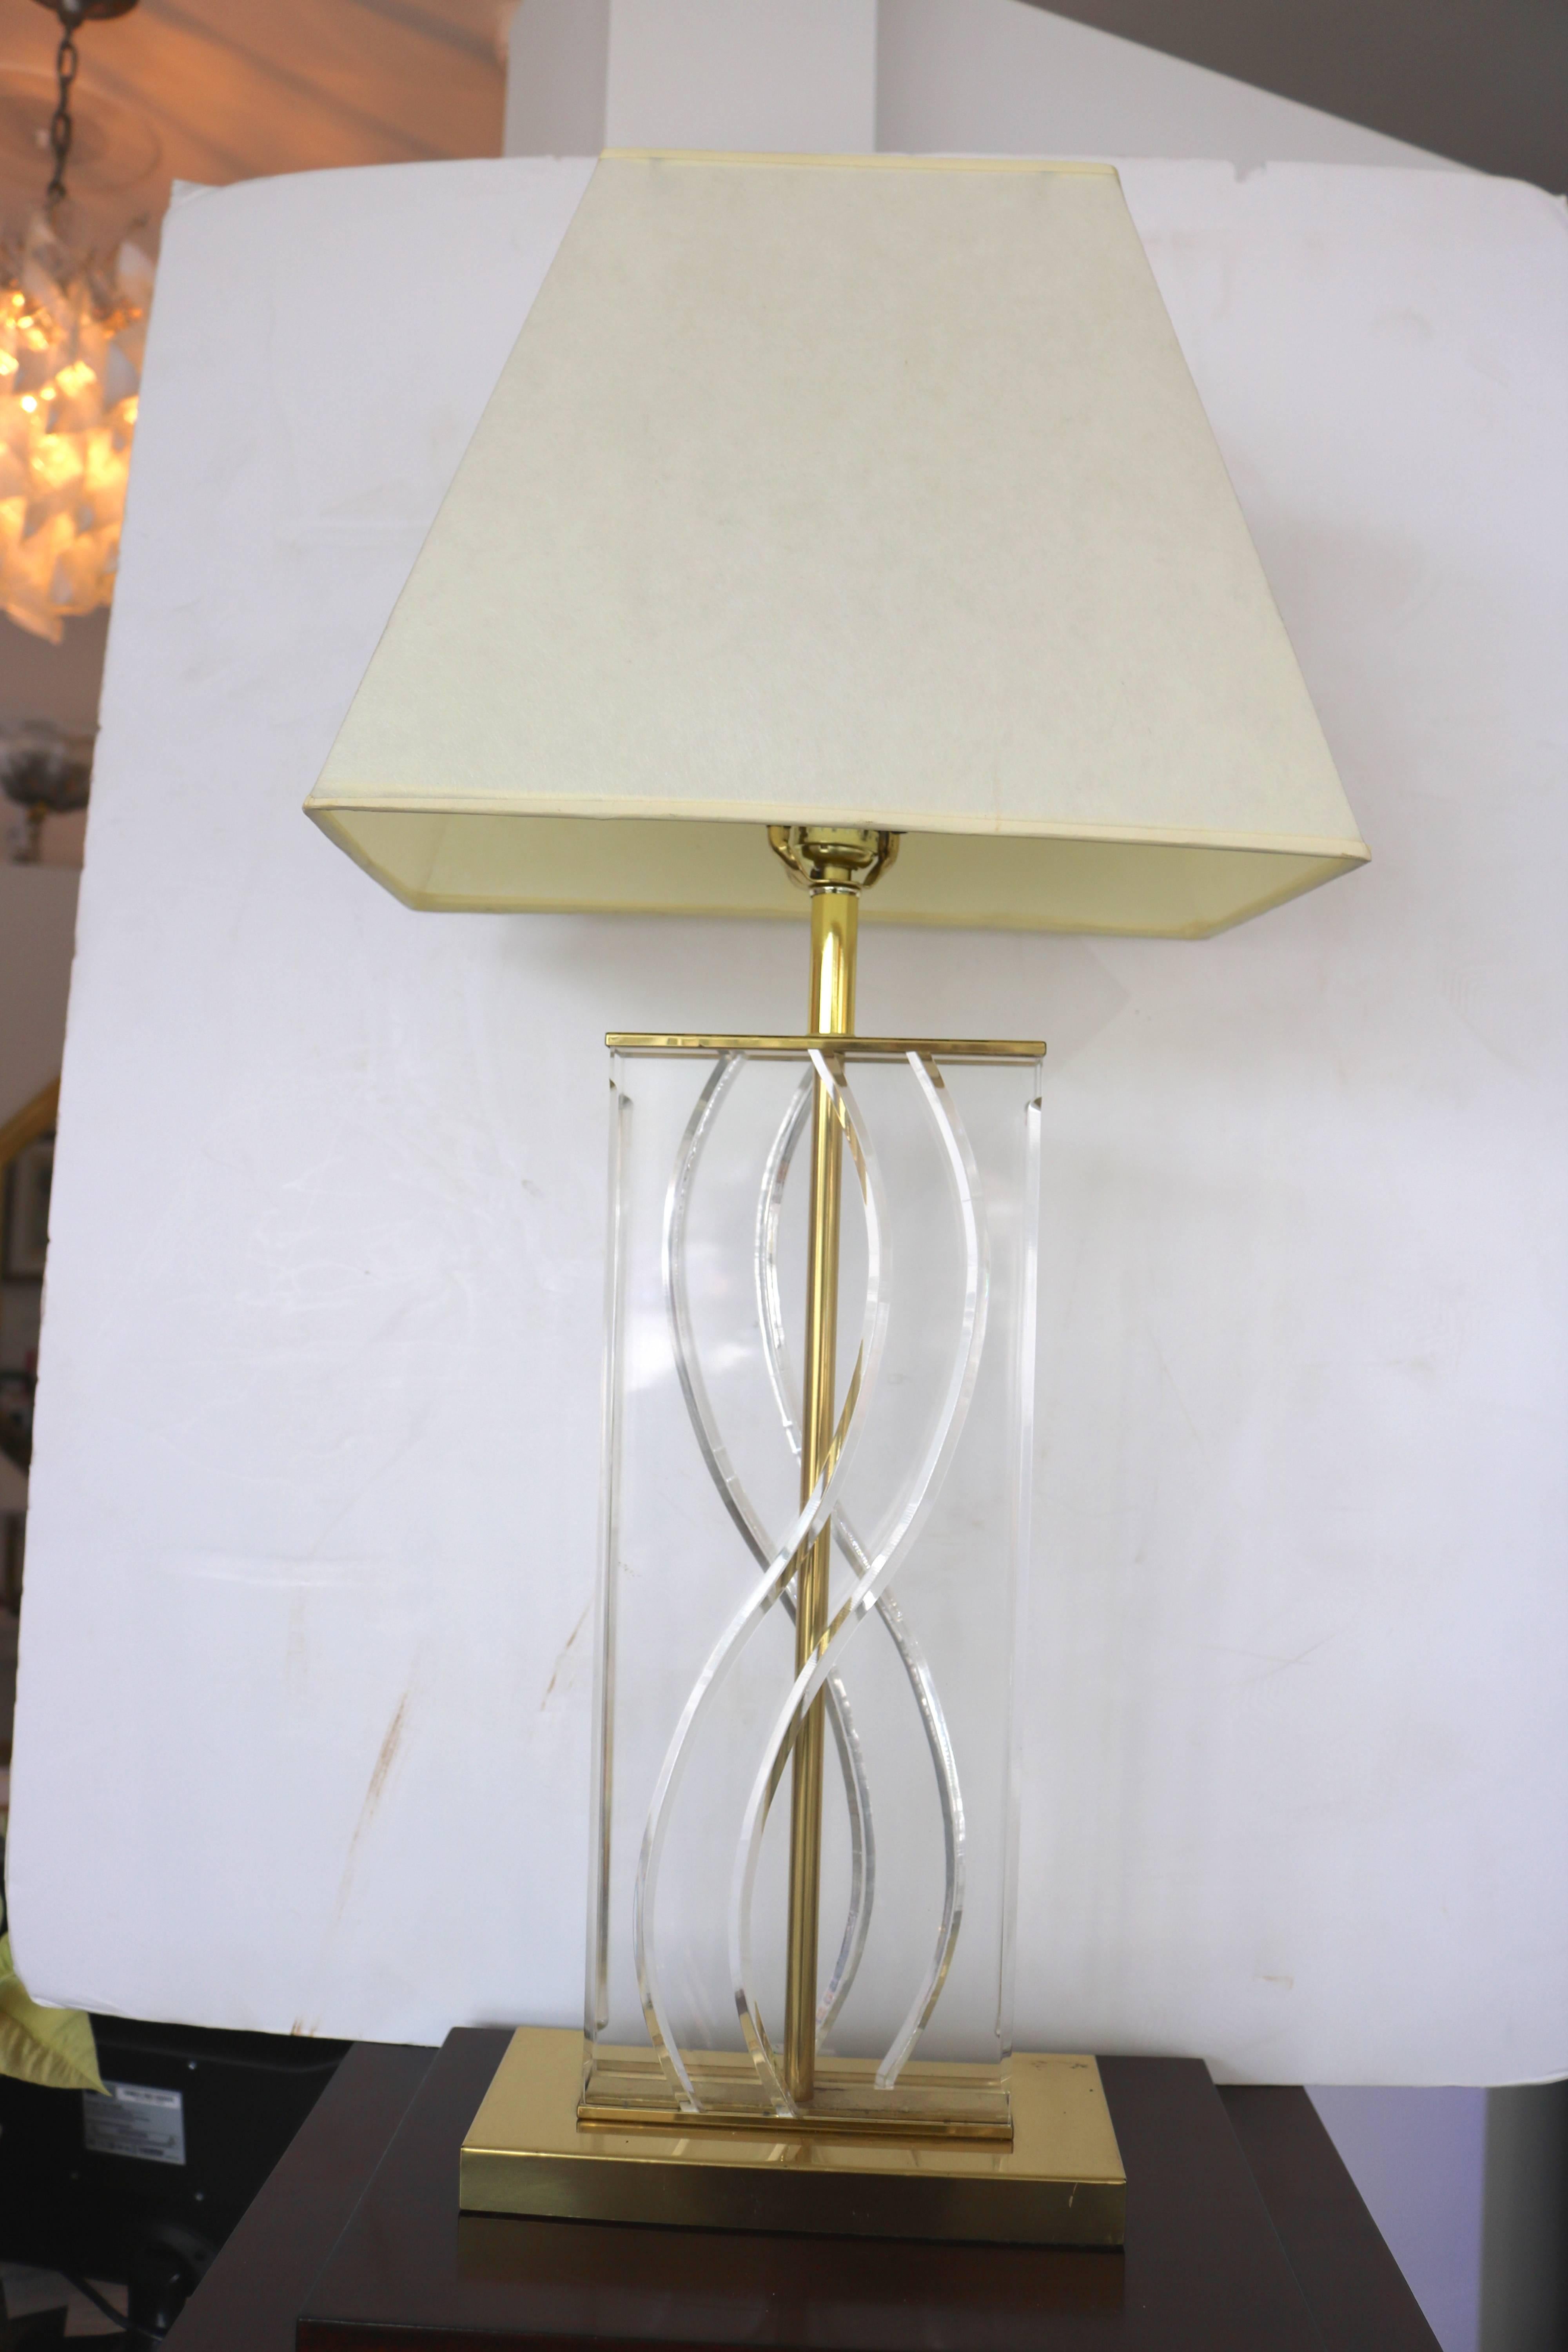 This stylish table lamp dates from the 1970s-1980s with its clear Lucite slab-form which is detailed with four beveled soft-curves and the shade is a paper parchment in a soft cream coloration.

Note: Shade Dimensions are 11